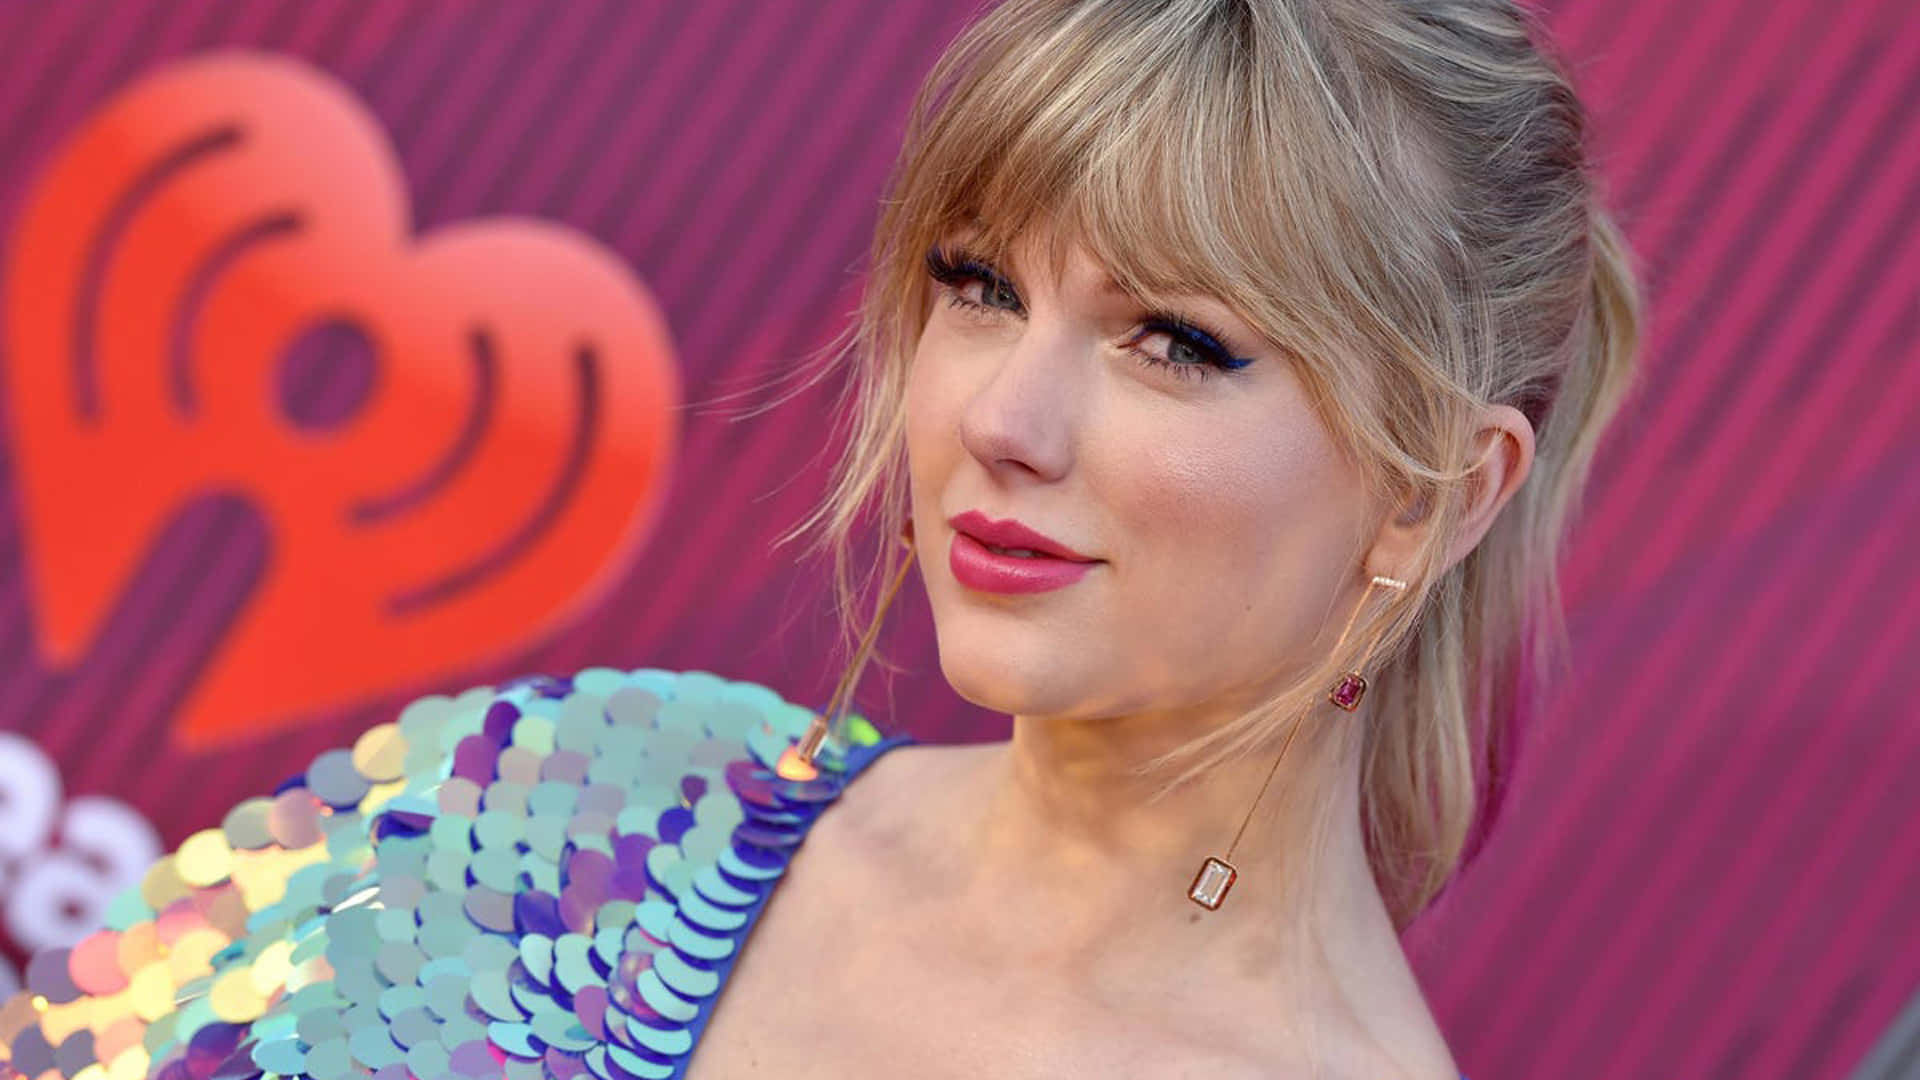 Taylorswift Ved Iheartradio Red Carpet Som Baggrund.